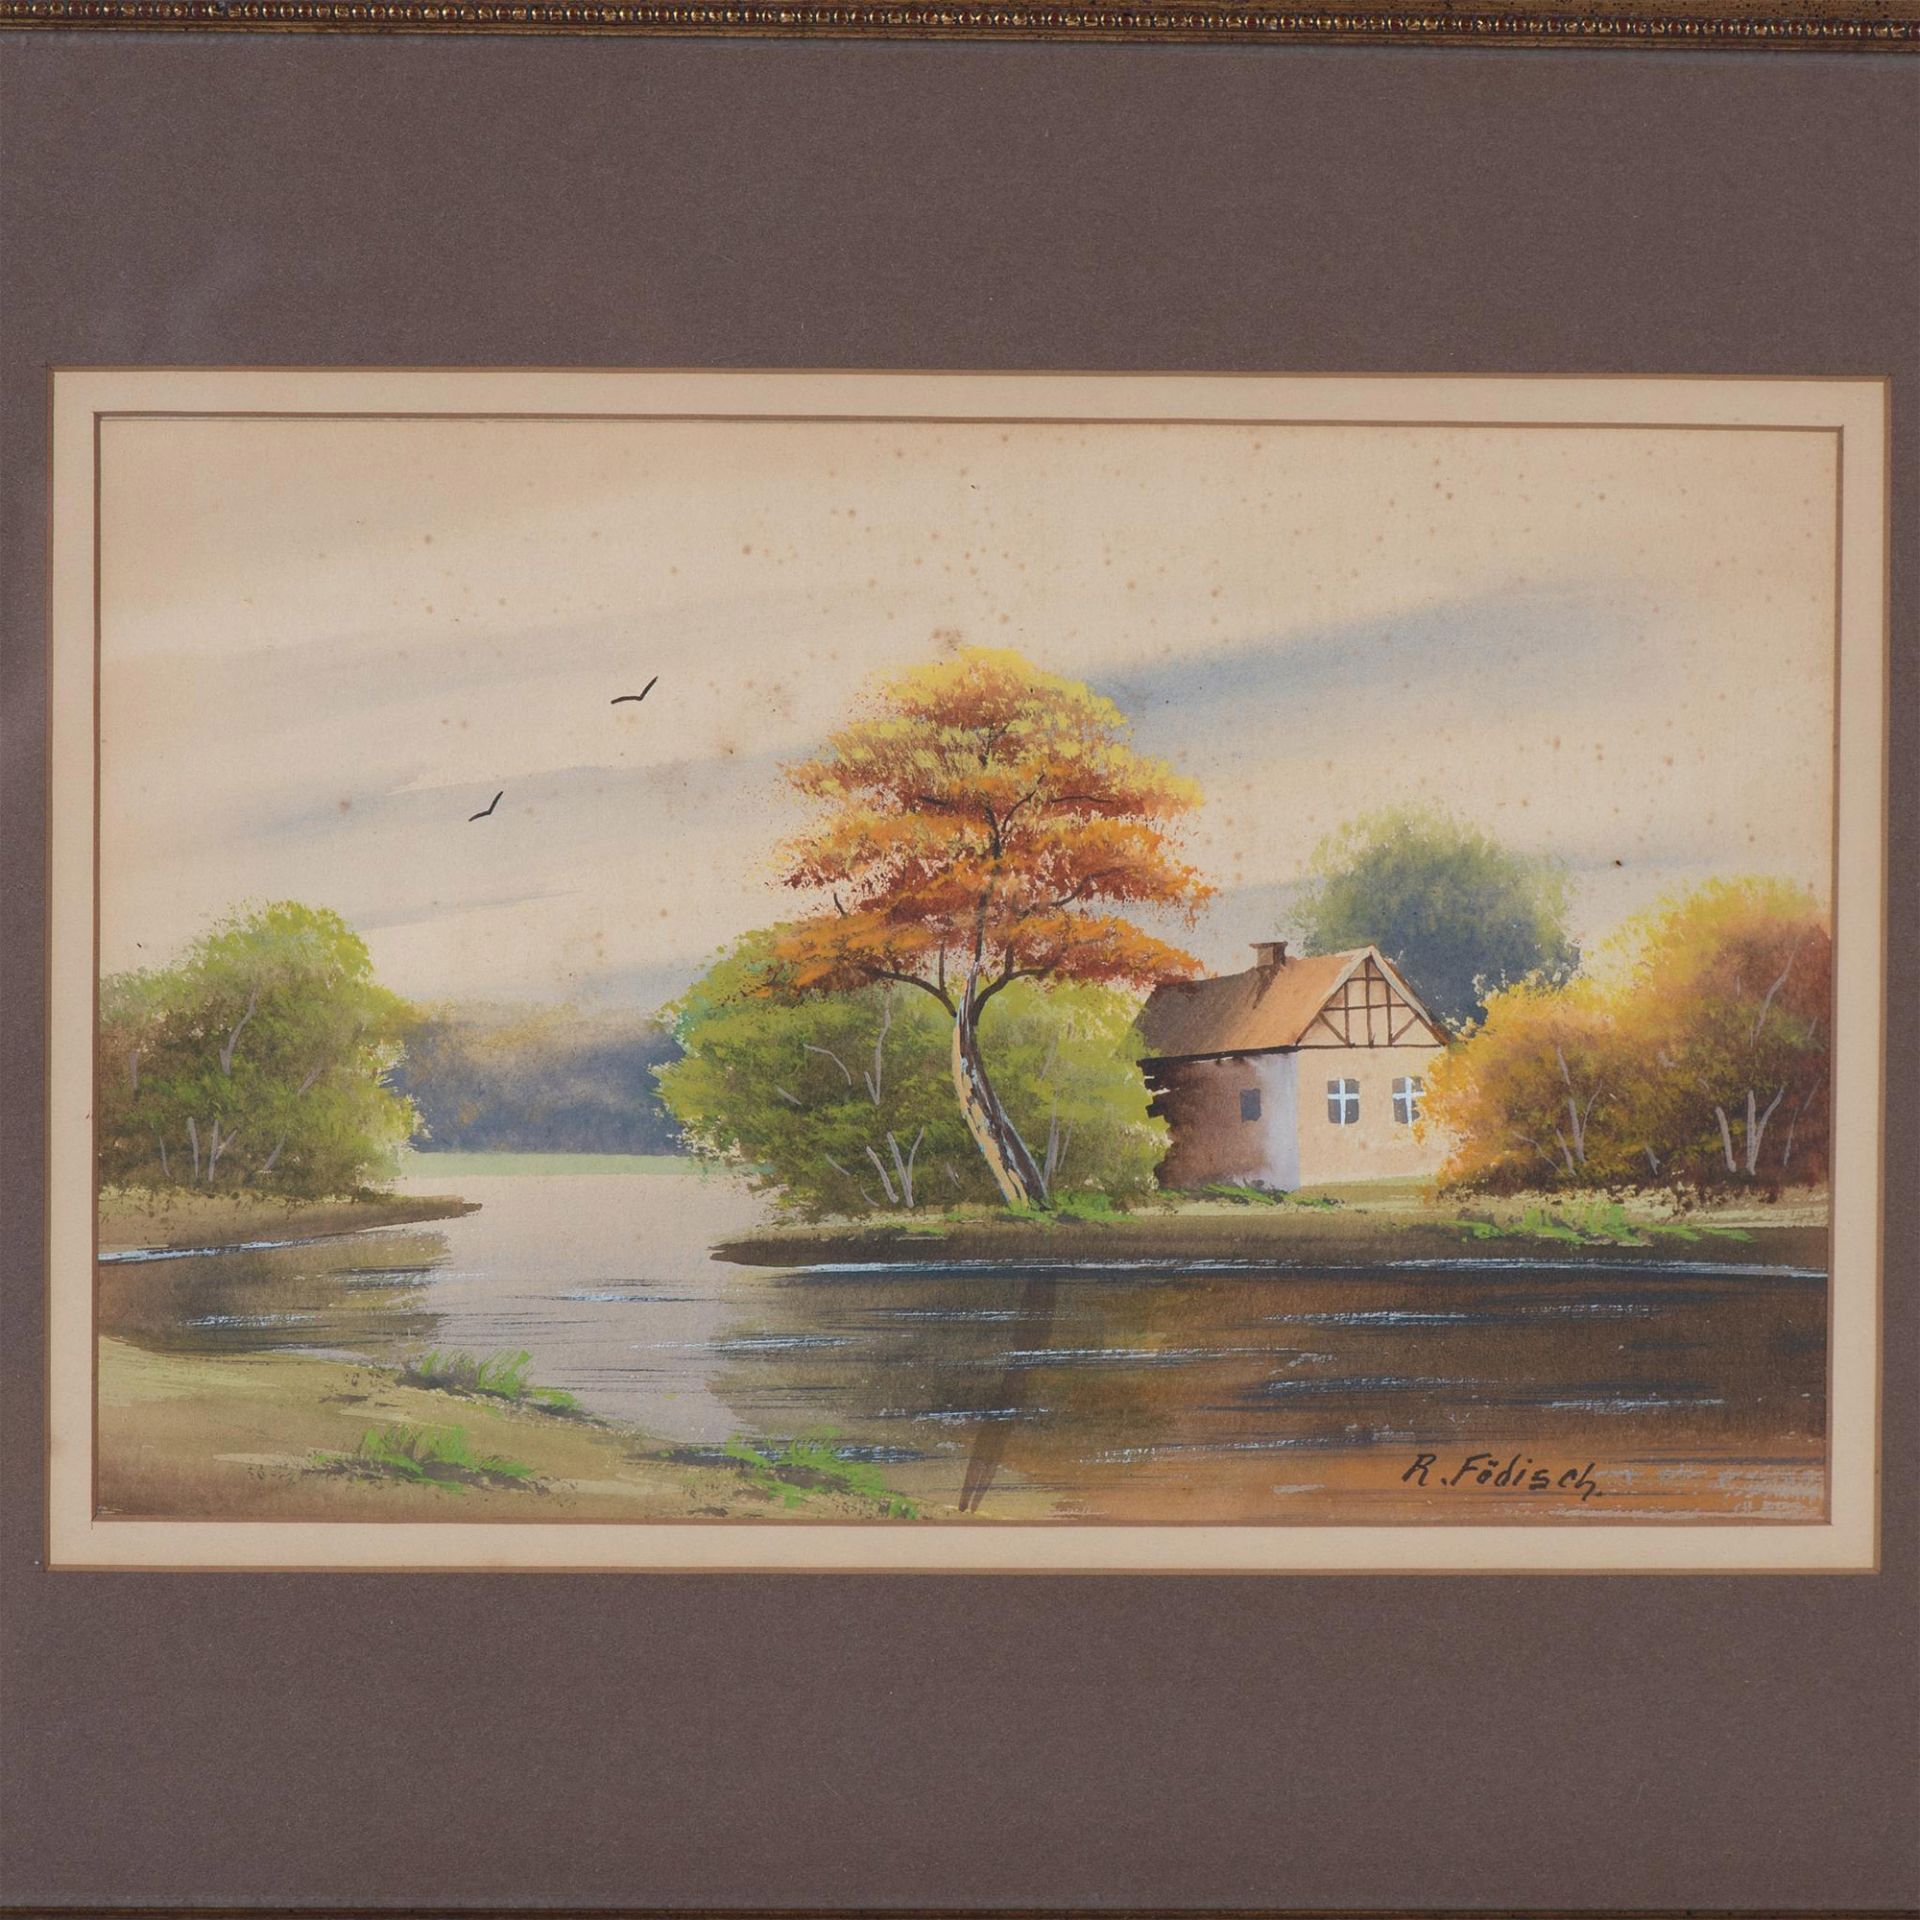 R. Fodisch, Set of Two Gouache on Paper Waterscapes, Signed - Image 8 of 10